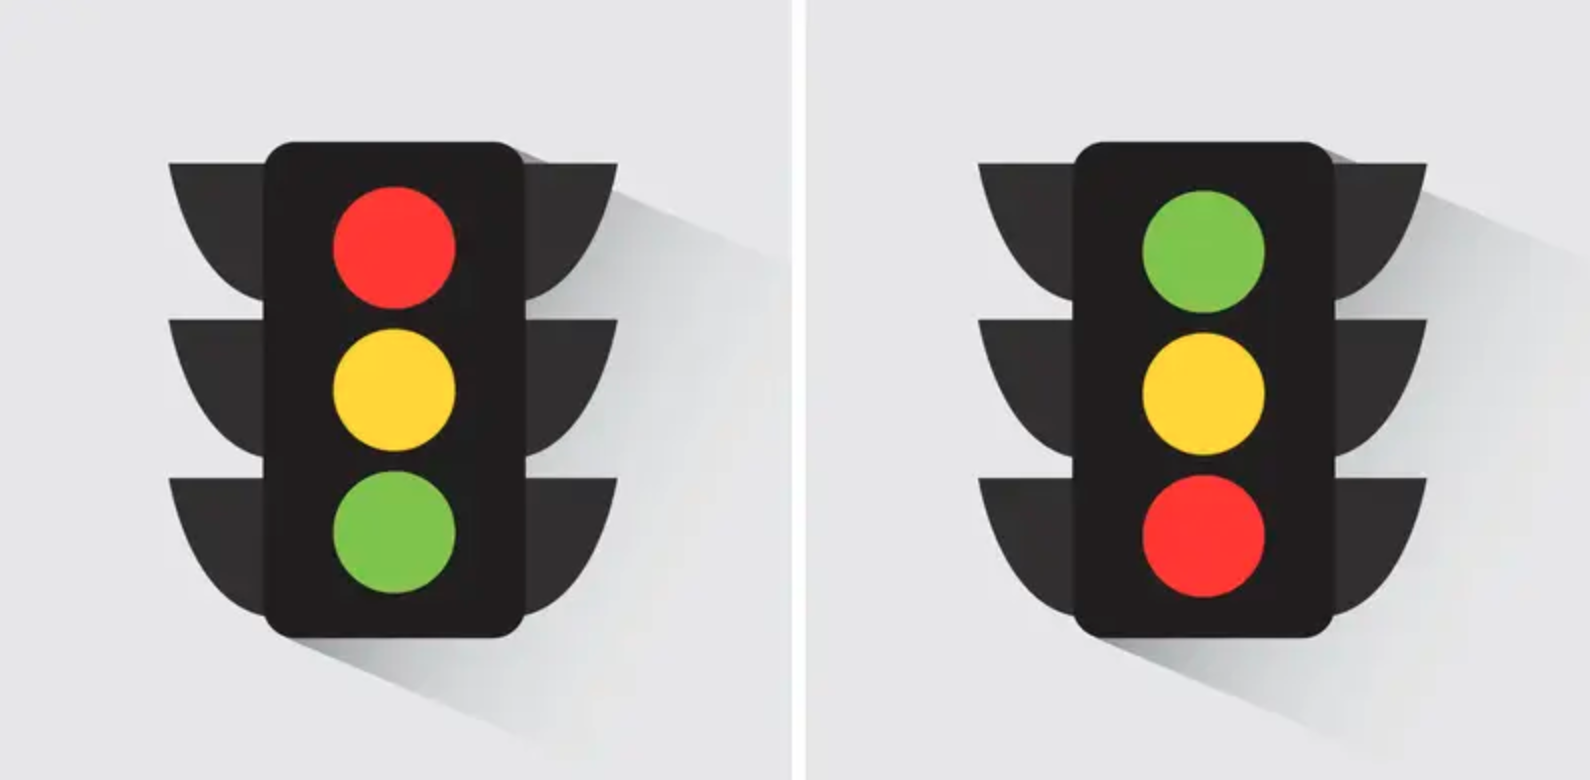 A stop light with red at the top and green at the bottom next to one with green at the top and red at the bottom